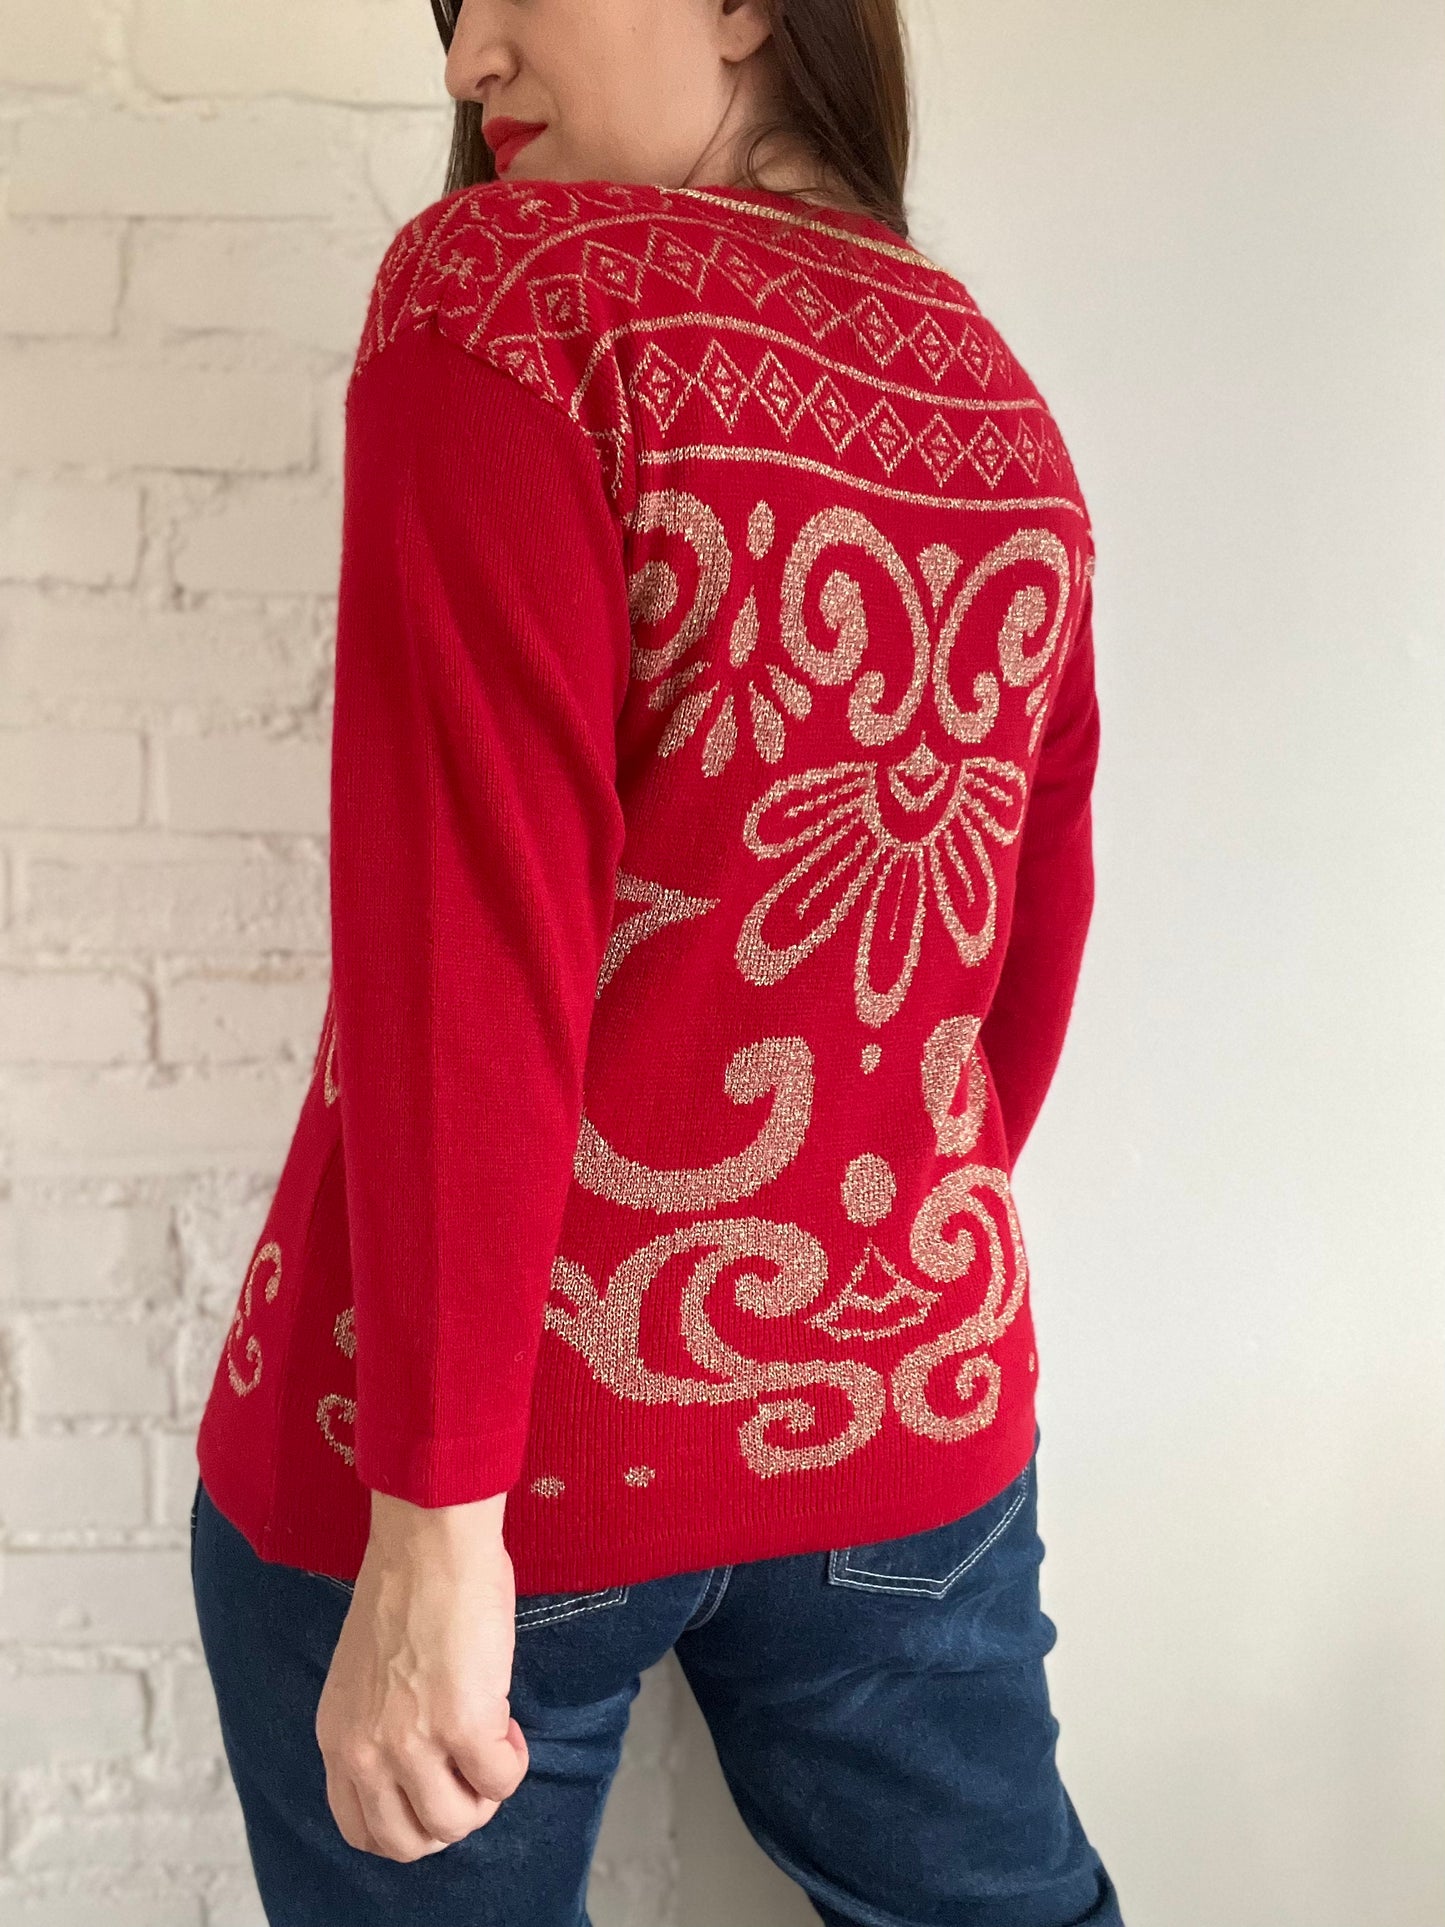 Red and Gold Metallic Sweater - M/L